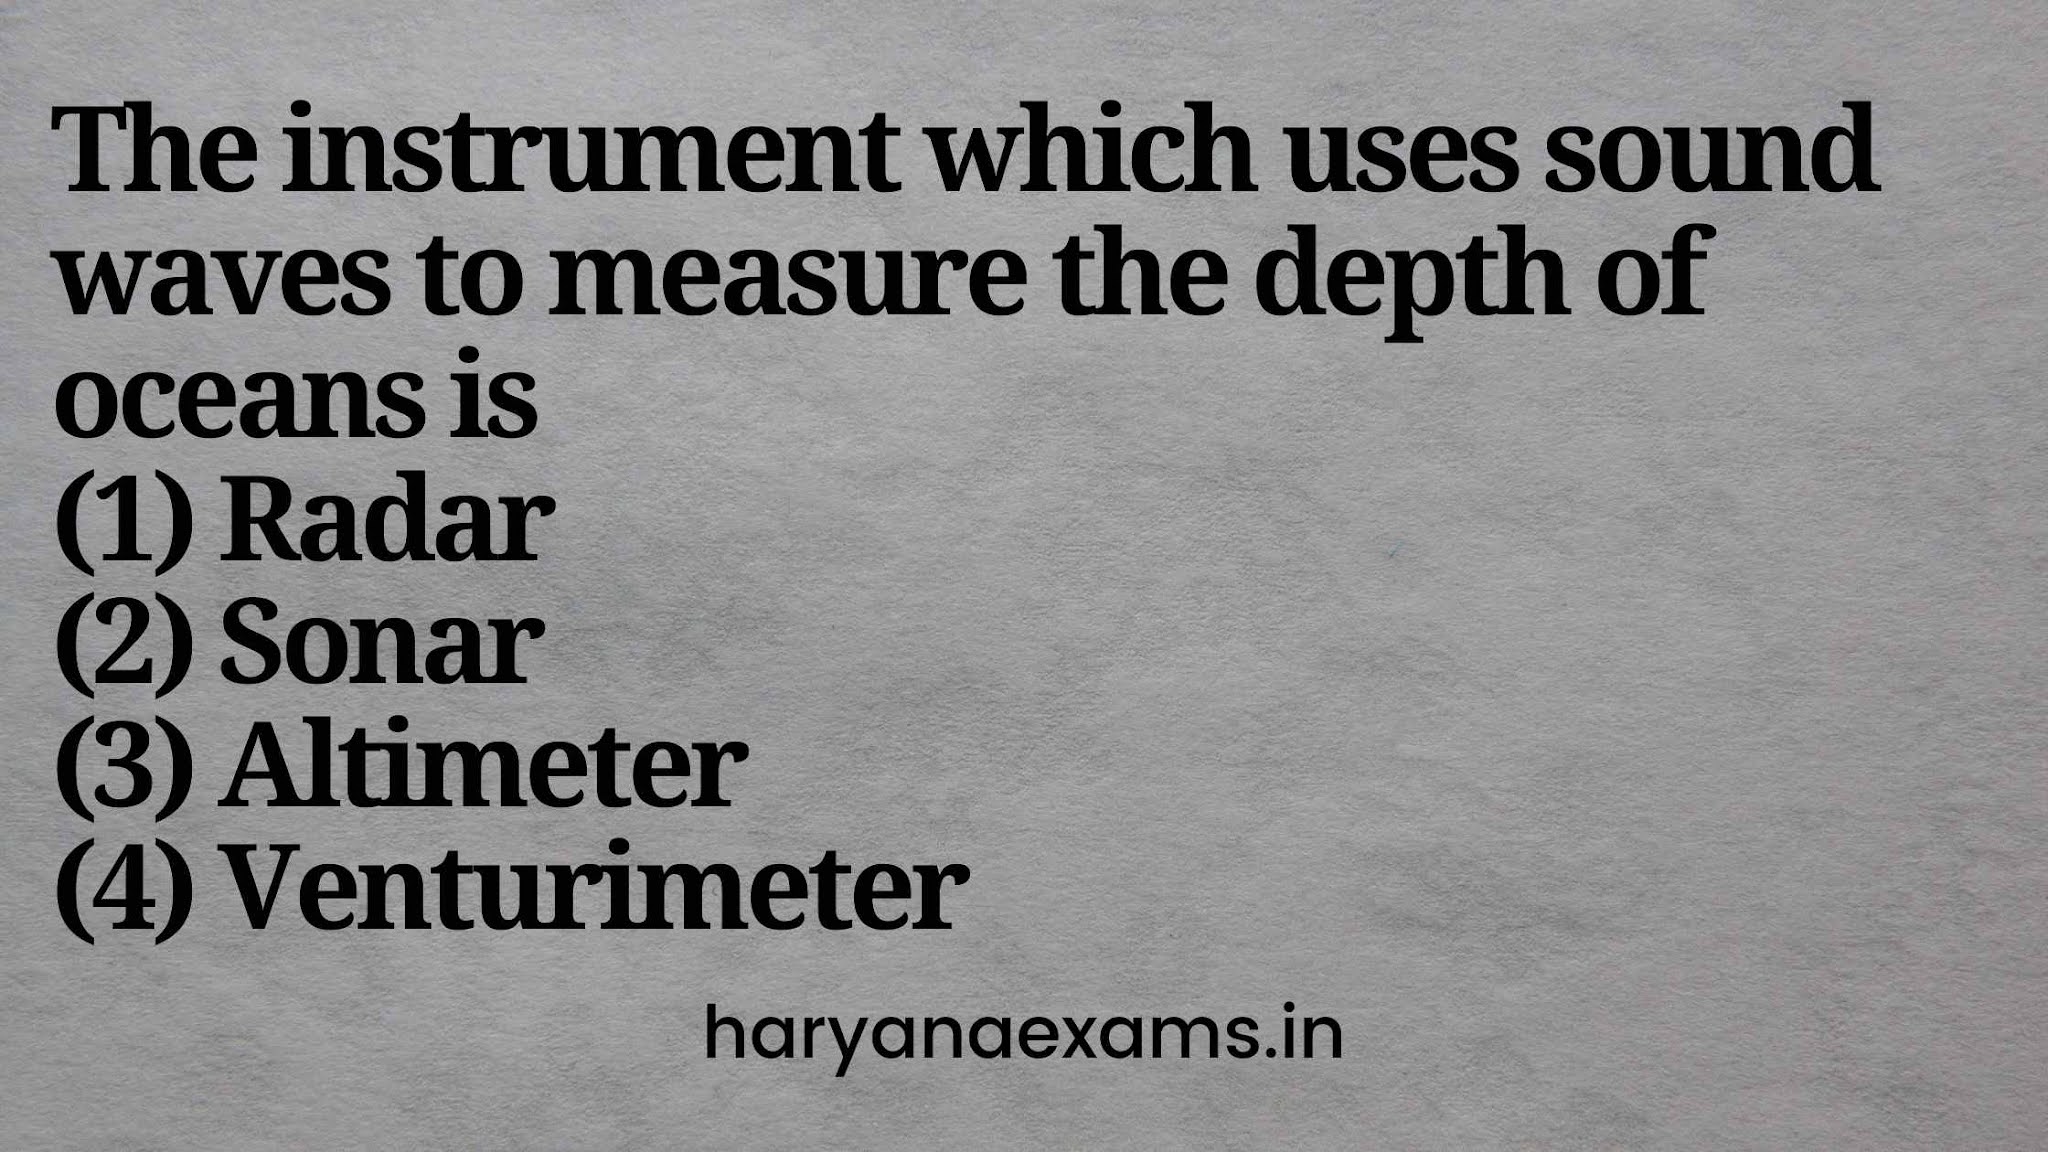 The instrument which uses sound waves to measure the depth of oceans is   (1) Radar   (2) Sonar   (3) Altimeter   (4) Venturimeter